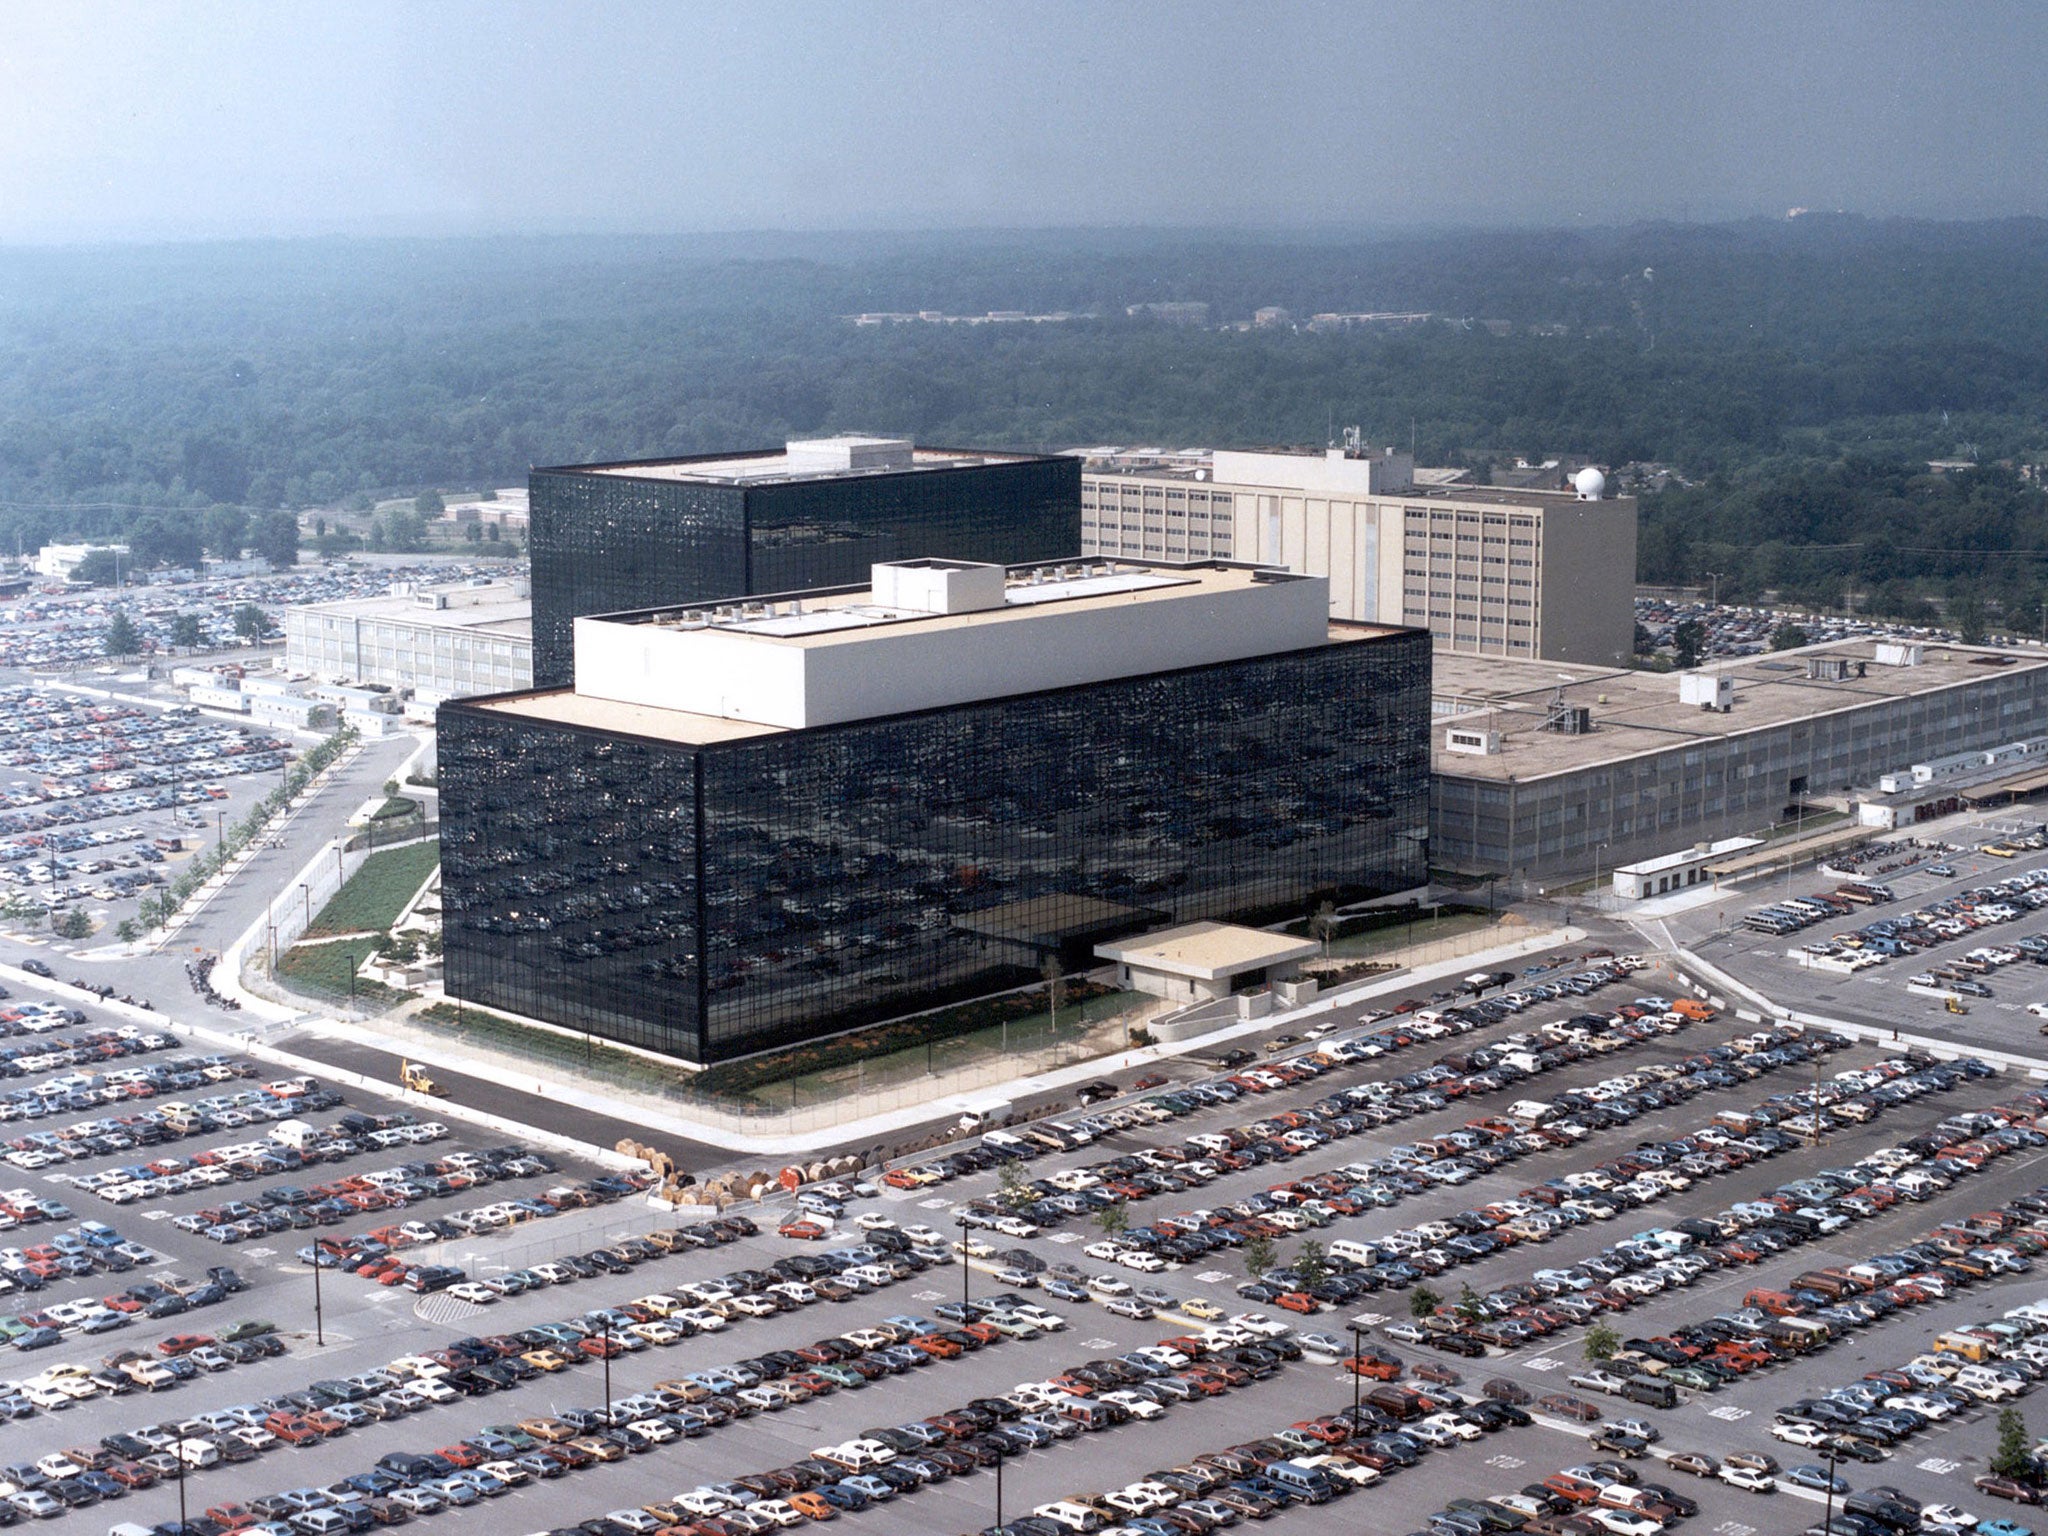 The NSA headquarters in Fort Meade, Maryland, USA